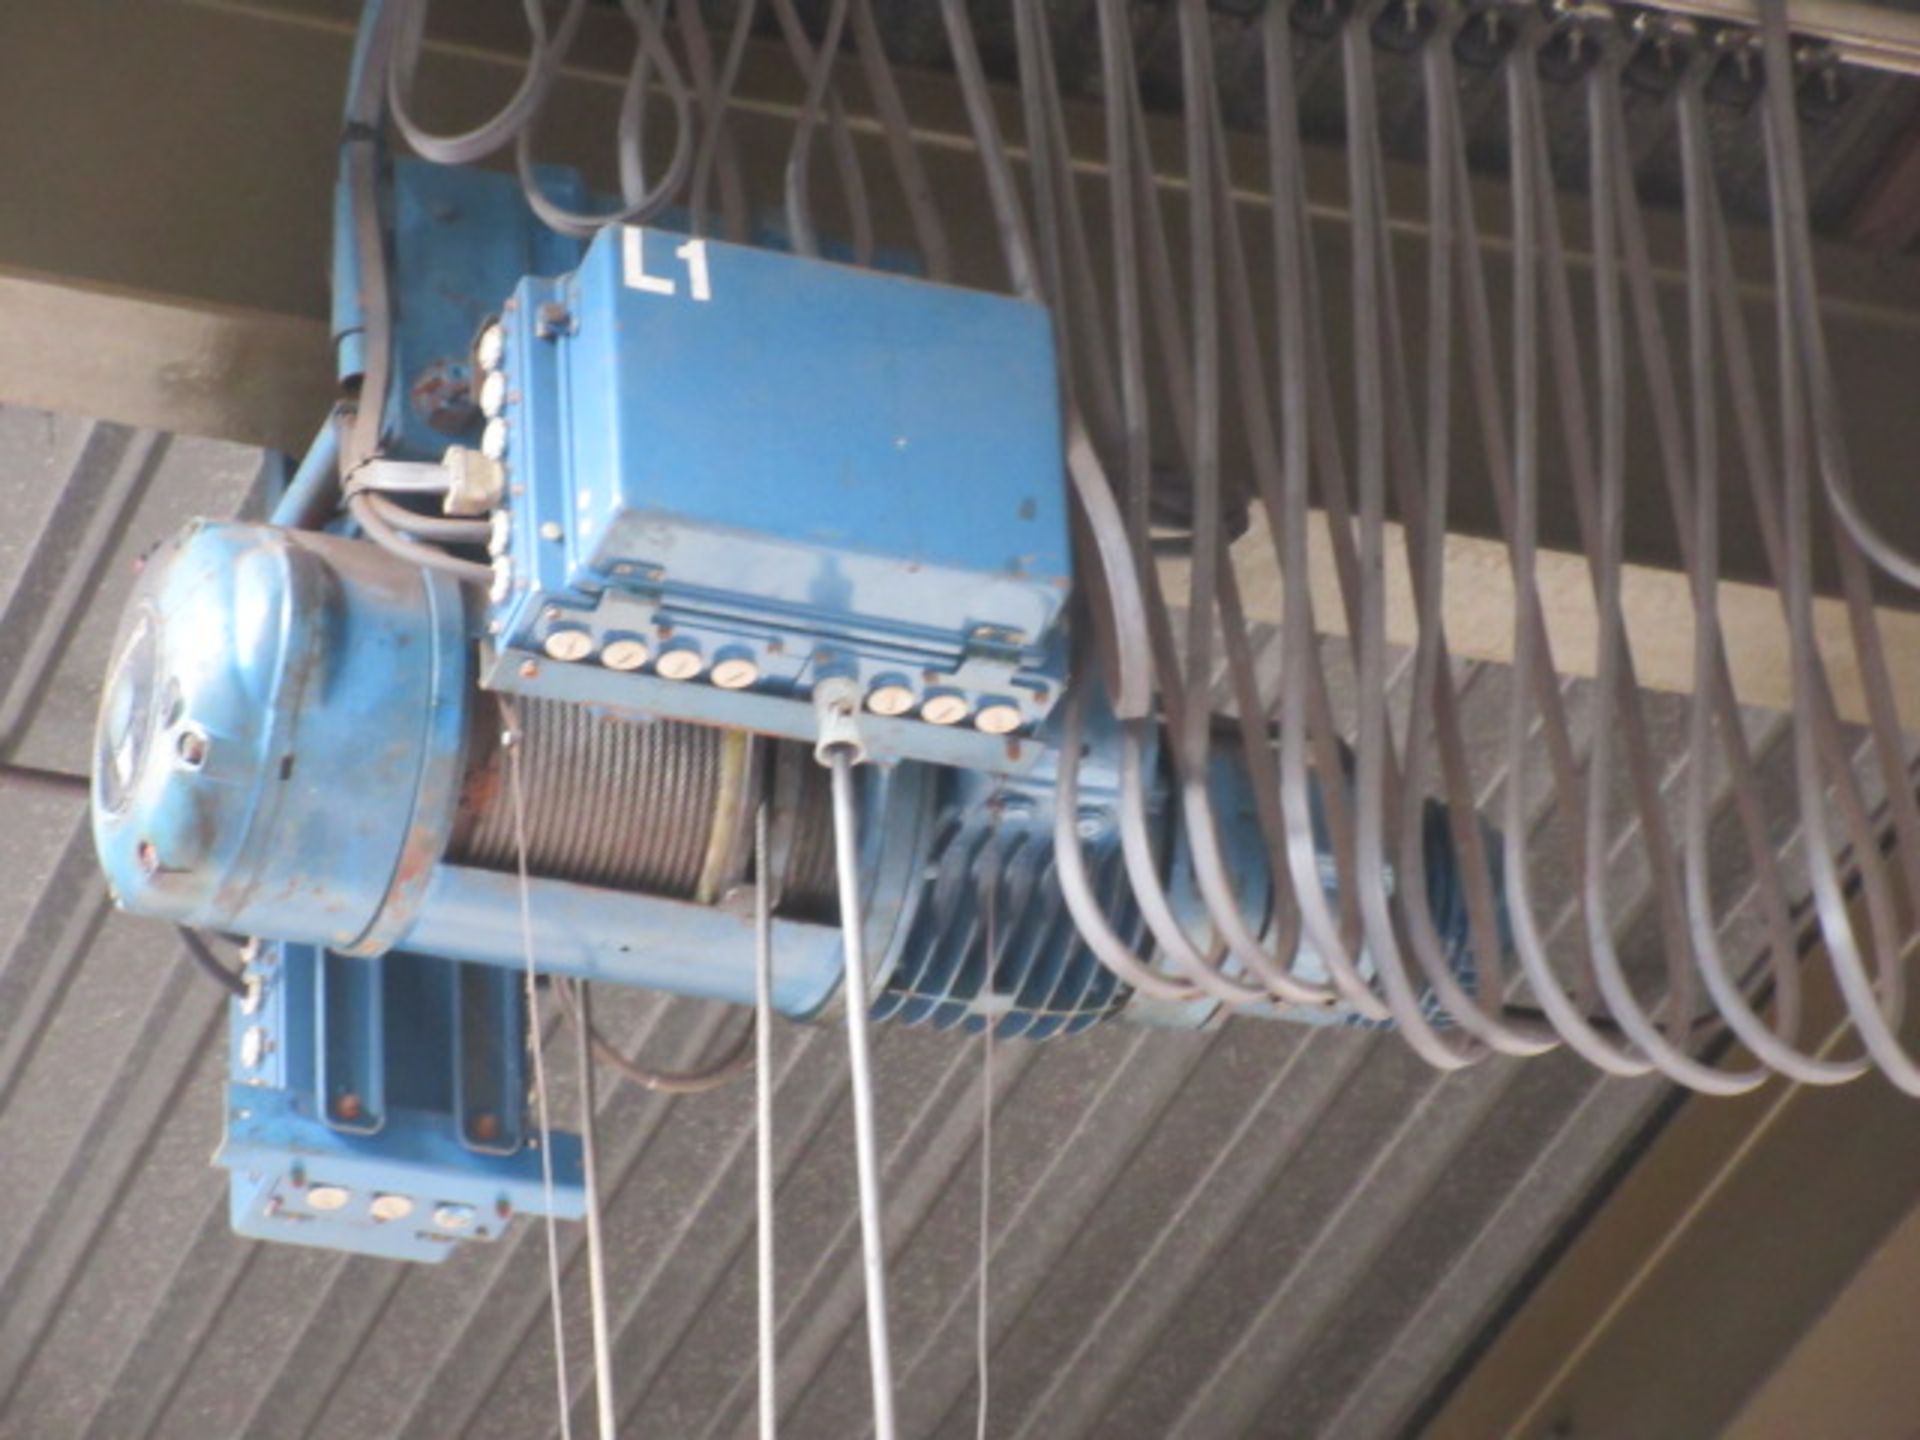 Demag crane hoist 2000kg capacity, under slung wire rope hoist, powered carriage and pendant control - Image 2 of 4